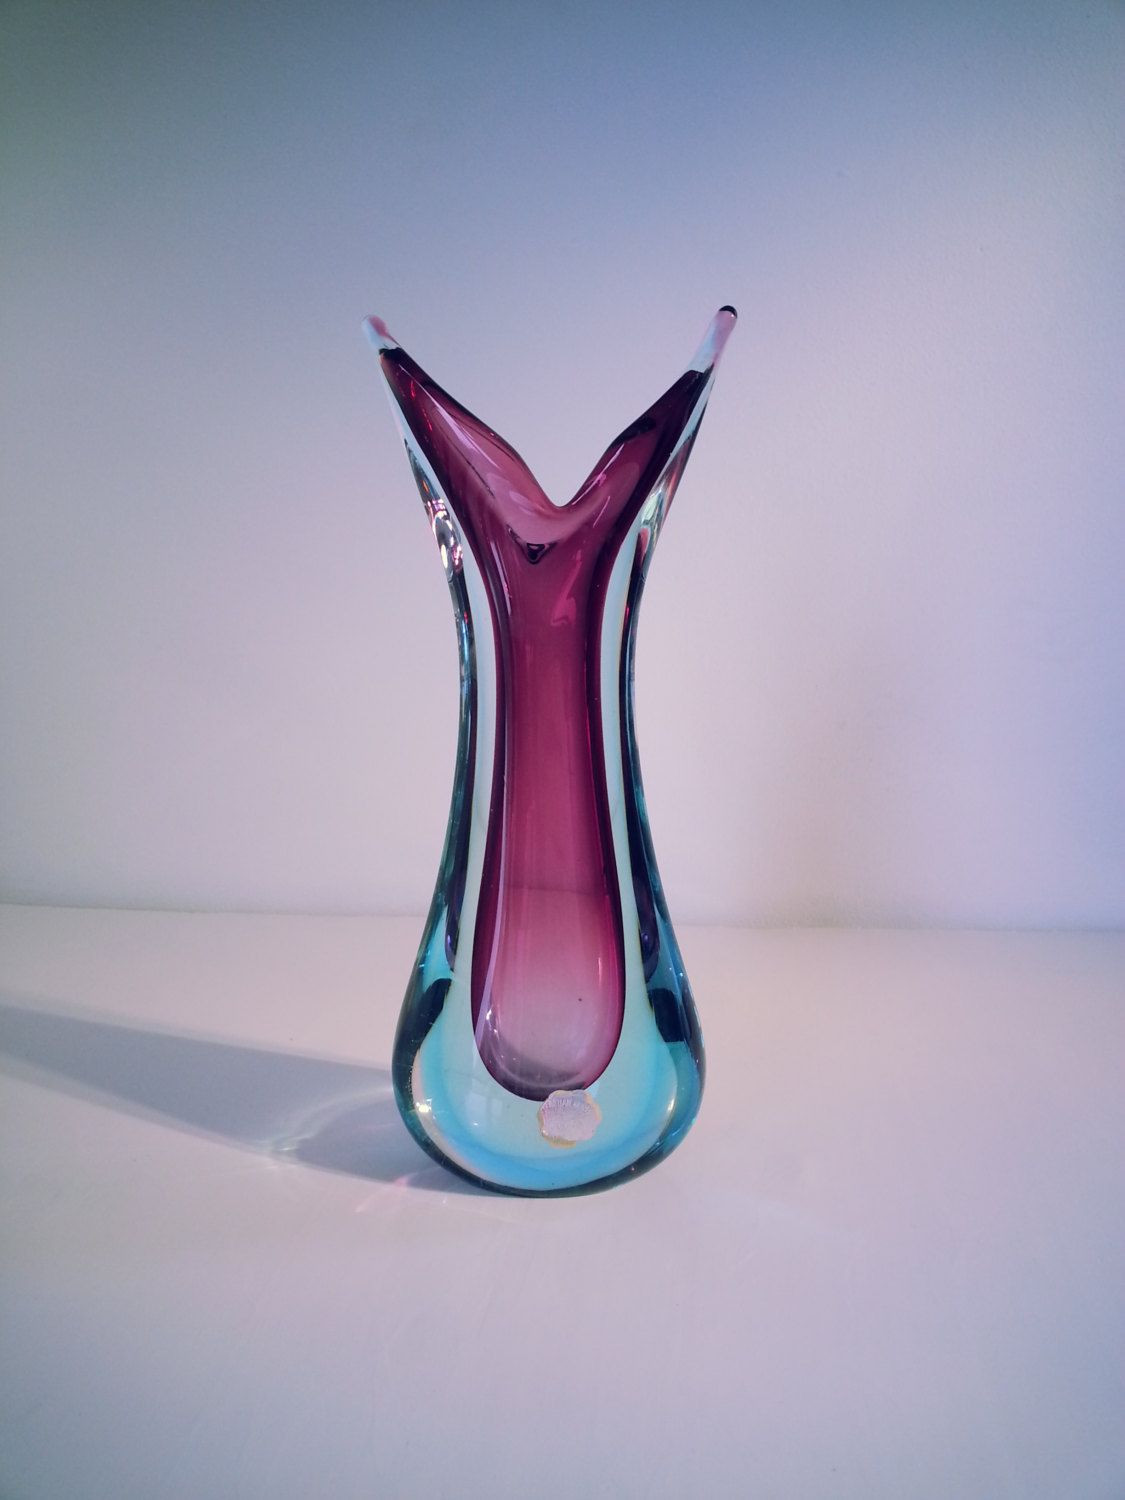 glass pumpkin vase of murano sommerso genuine venetian glass 1950s 1960s purple blue intended for murano sommerso genuine venetian glass 1950s 1960s purple blue glass vase pulled design vase made in italy by fcollectables on etsy